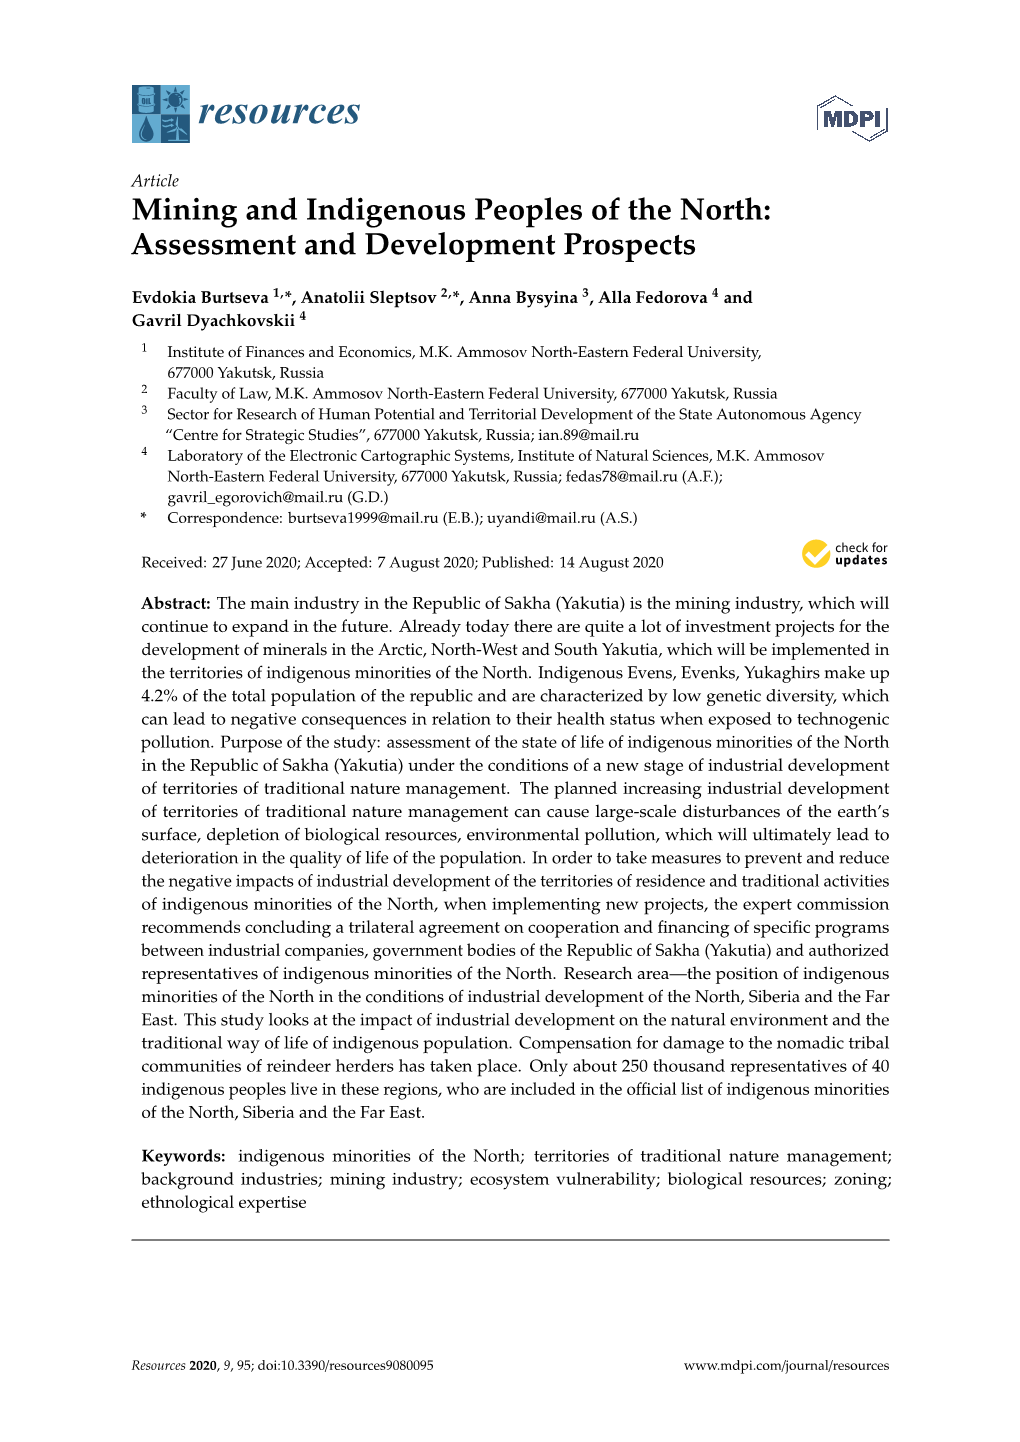 Mining and Indigenous Peoples of the North: Assessment and Development Prospects